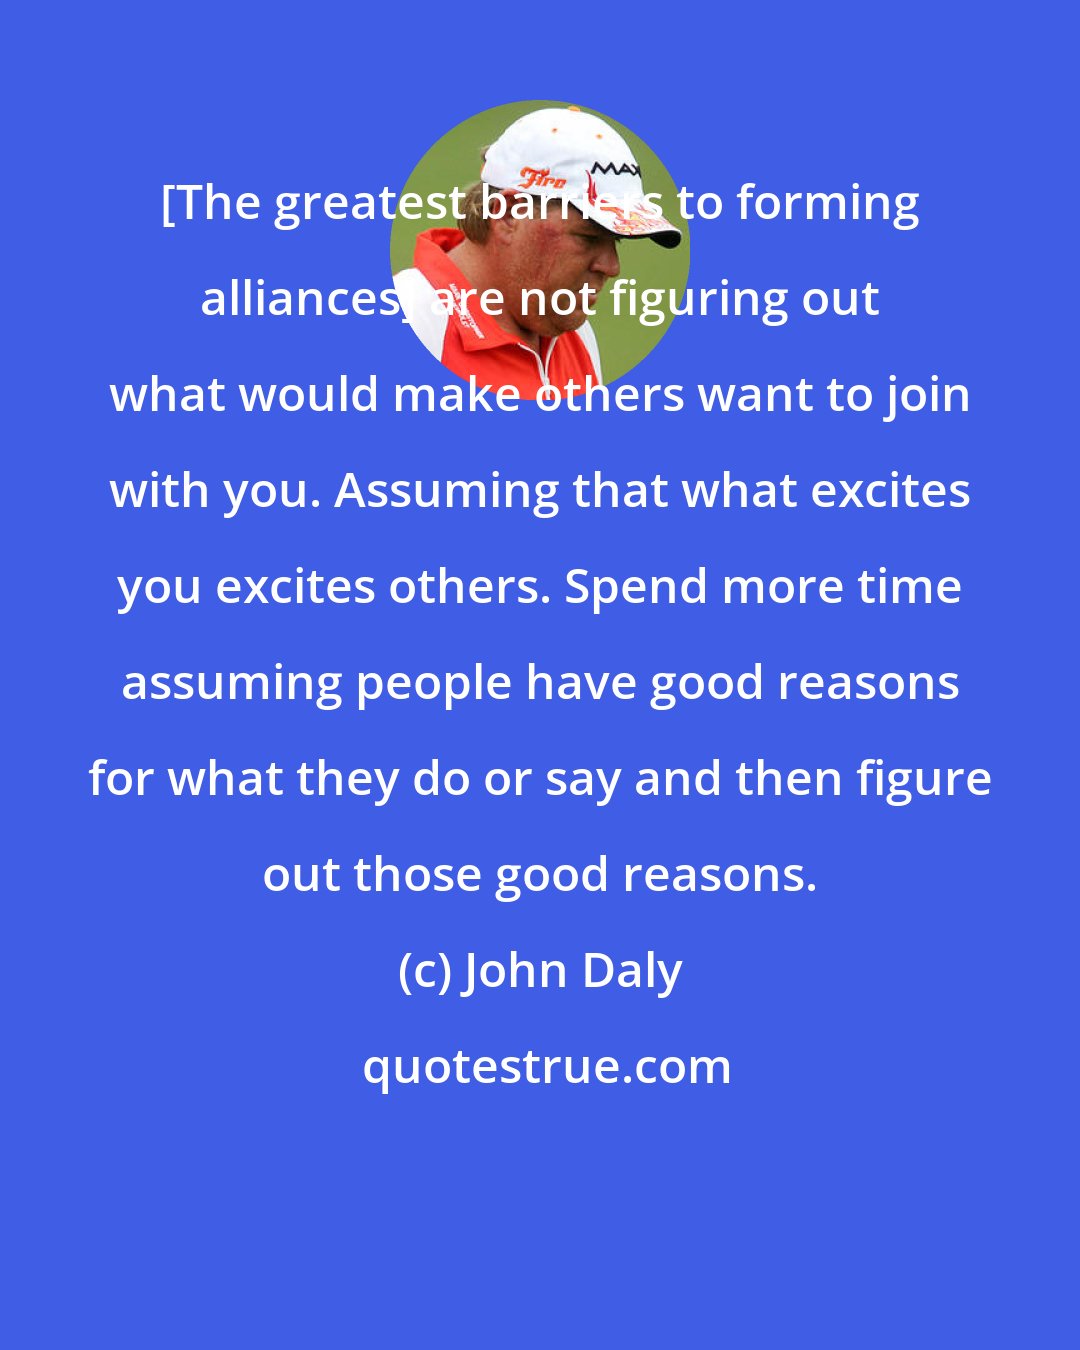 John Daly: [The greatest barriers to forming alliances] are not figuring out what would make others want to join with you. Assuming that what excites you excites others. Spend more time assuming people have good reasons for what they do or say and then figure out those good reasons.